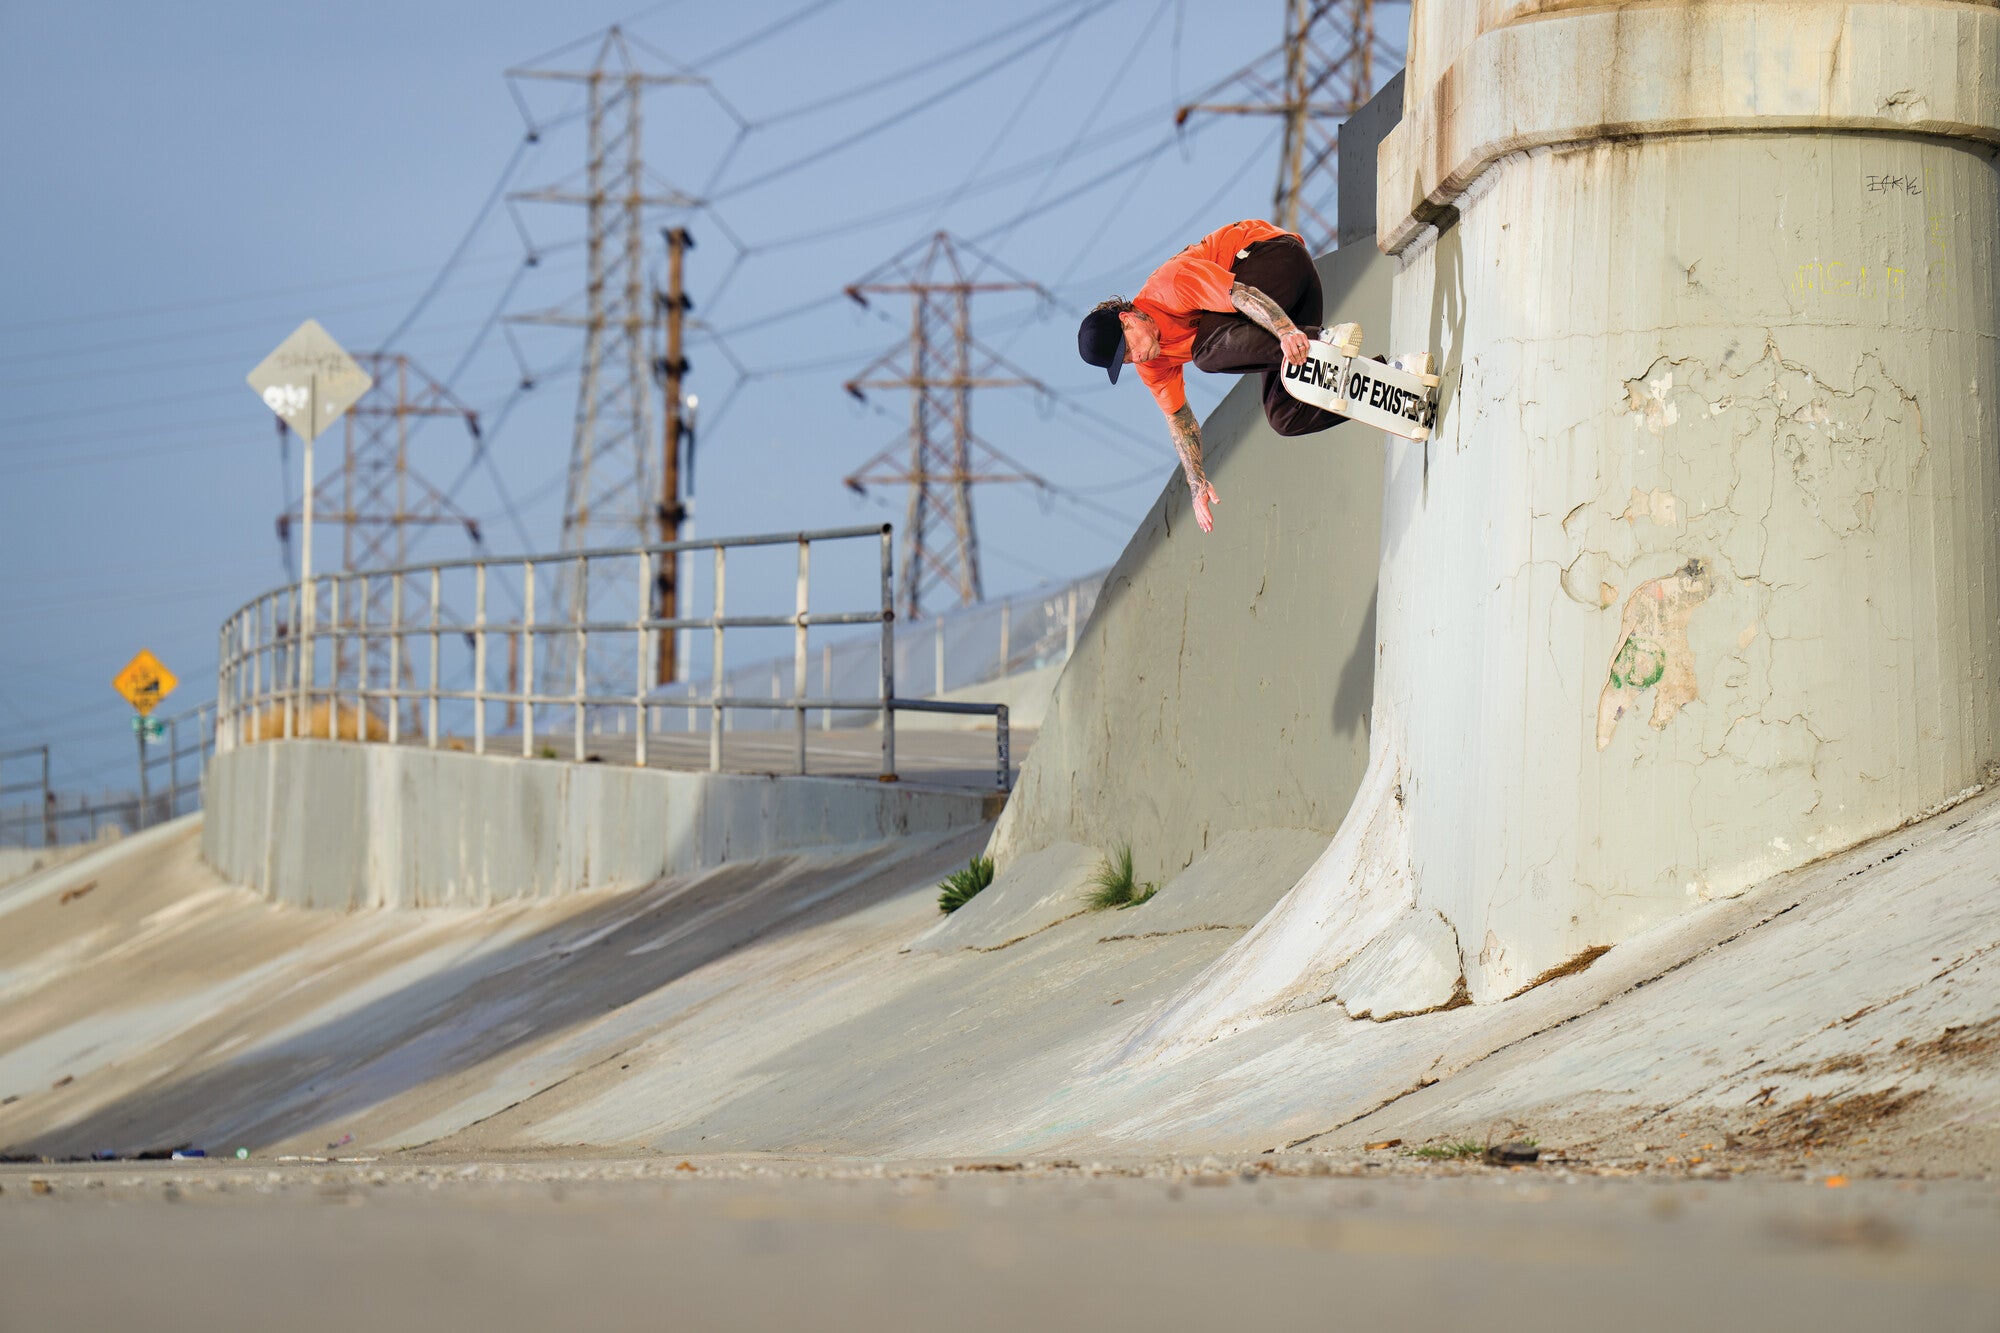 Vans Skateboarding and Anthony Van Engelen Skate to the Future with the All-New AVE 2.0